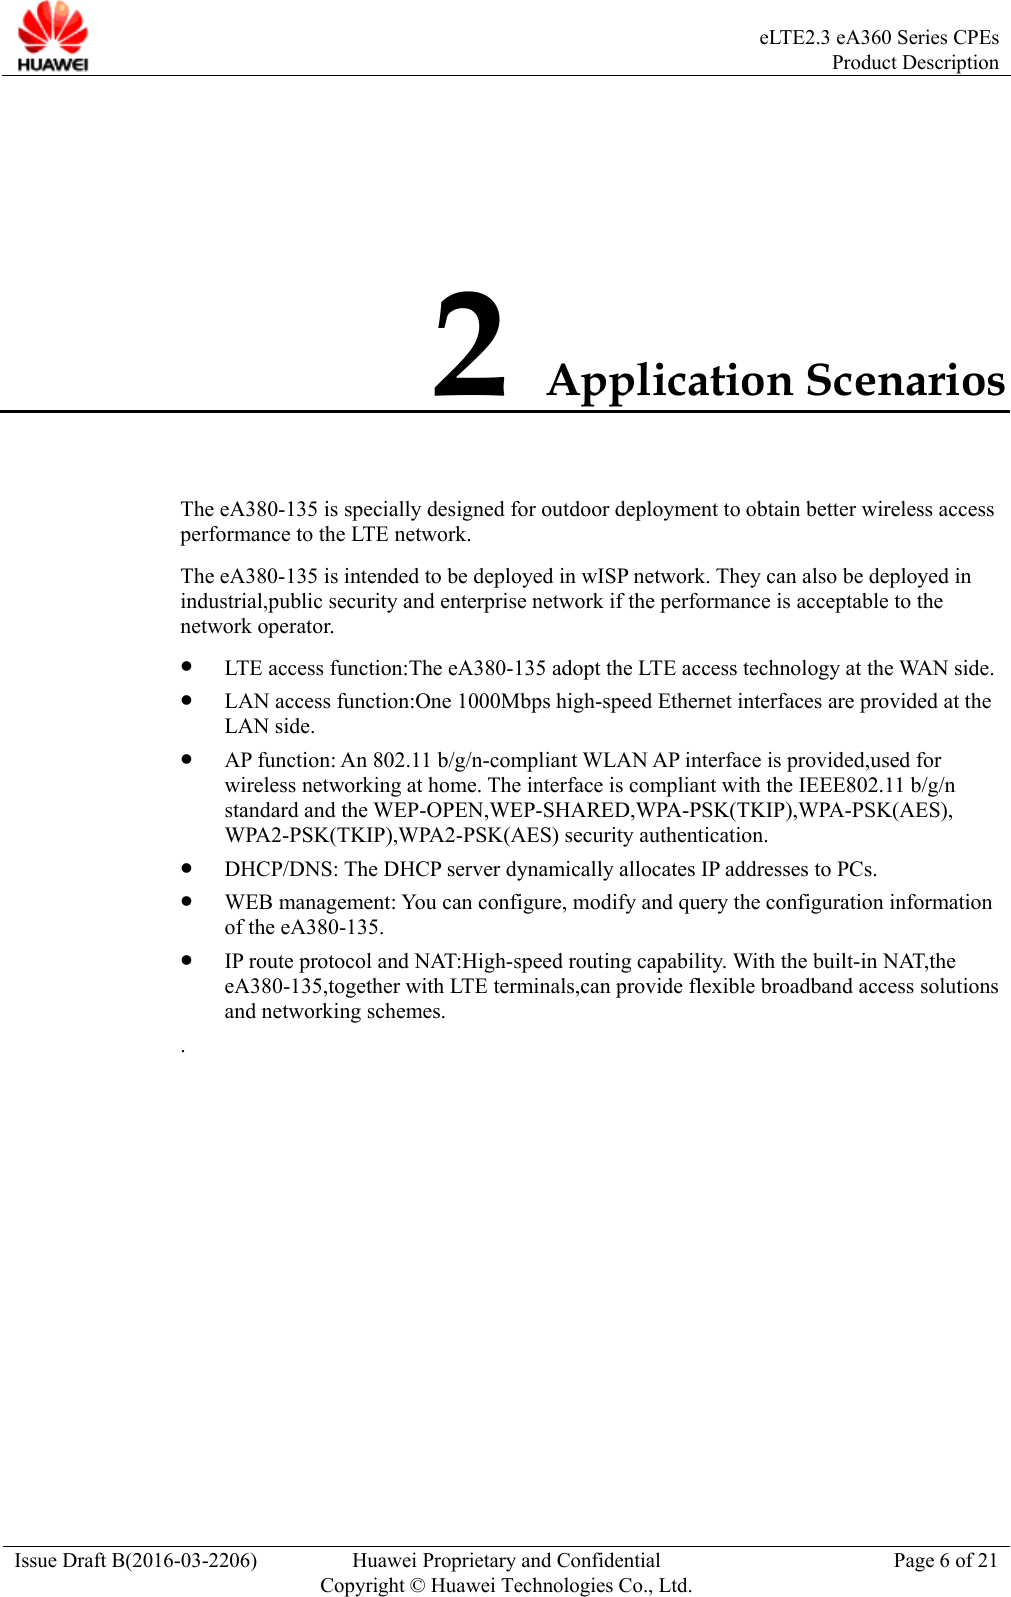  eLTE2.3 eA360 Series CPEsProduct Description Issue Draft B(2016-03-2206)  Huawei Proprietary and Confidential Copyright © Huawei Technologies Co., Ltd.Page 6 of 21 2 Application Scenarios The eA380-135 is specially designed for outdoor deployment to obtain better wireless access performance to the LTE network.   The eA380-135 is intended to be deployed in wISP network. They can also be deployed in industrial,public security and enterprise network if the performance is acceptable to the network operator.  LTE access function:The eA380-135 adopt the LTE access technology at the WAN side.  LAN access function:One 1000Mbps high-speed Ethernet interfaces are provided at the LAN side.  AP function: An 802.11 b/g/n-compliant WLAN AP interface is provided,used for wireless networking at home. The interface is compliant with the IEEE802.11 b/g/n standard and the WEP-OPEN,WEP-SHARED,WPA-PSK(TKIP),WPA-PSK(AES), WPA2-PSK(TKIP),WPA2-PSK(AES) security authentication.  DHCP/DNS: The DHCP server dynamically allocates IP addresses to PCs.  WEB management: You can configure, modify and query the configuration information of the eA380-135.  IP route protocol and NAT:High-speed routing capability. With the built-in NAT,the eA380-135,together with LTE terminals,can provide flexible broadband access solutions and networking schemes. . 